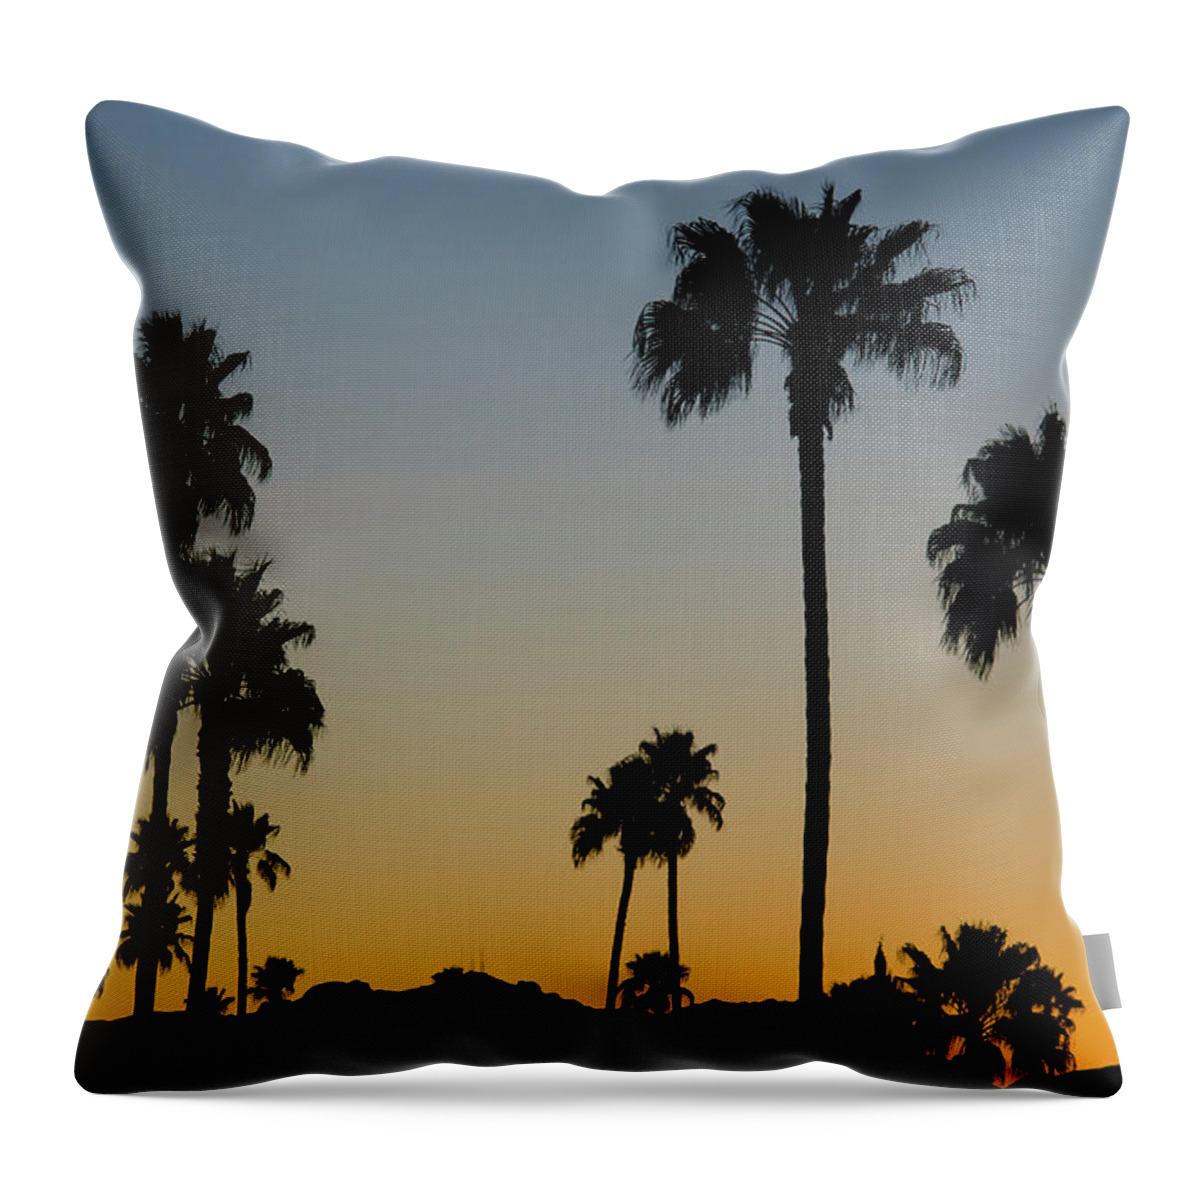 Scenics Throw Pillow featuring the photograph Palm Trees At Sunset by Chapin31